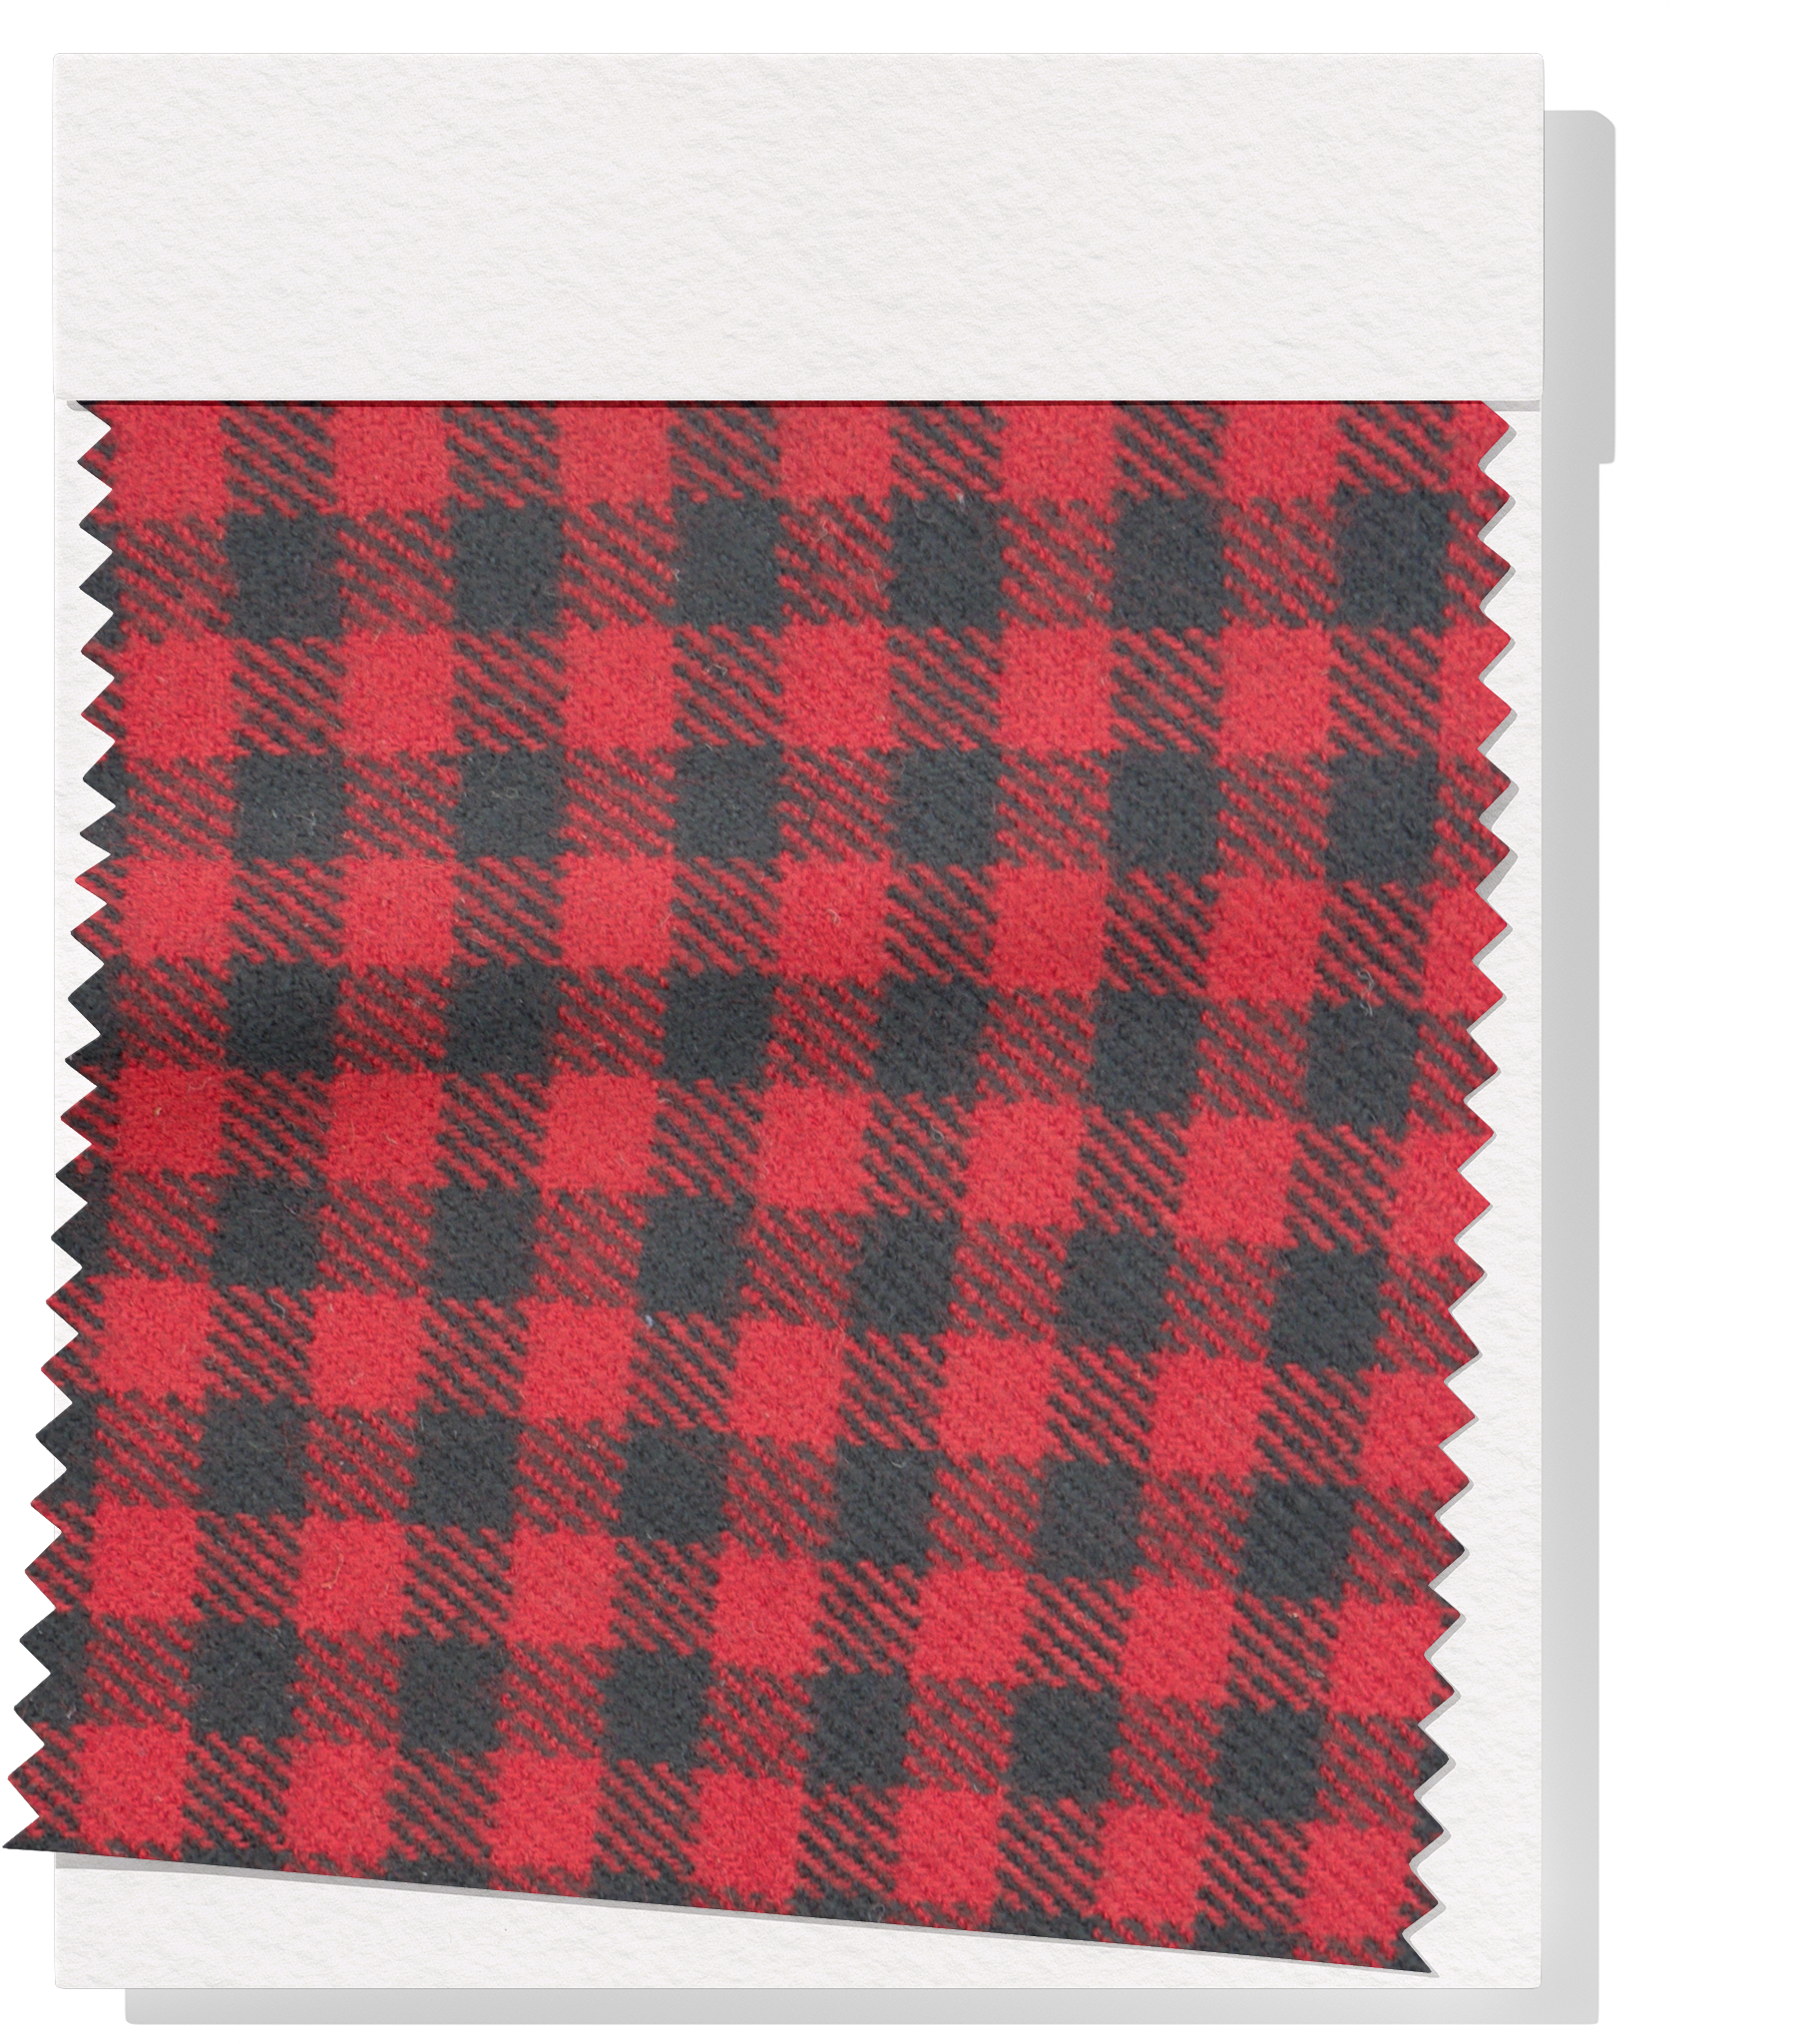 Checked Wool $18.00p/m - Black & Red (WC6)